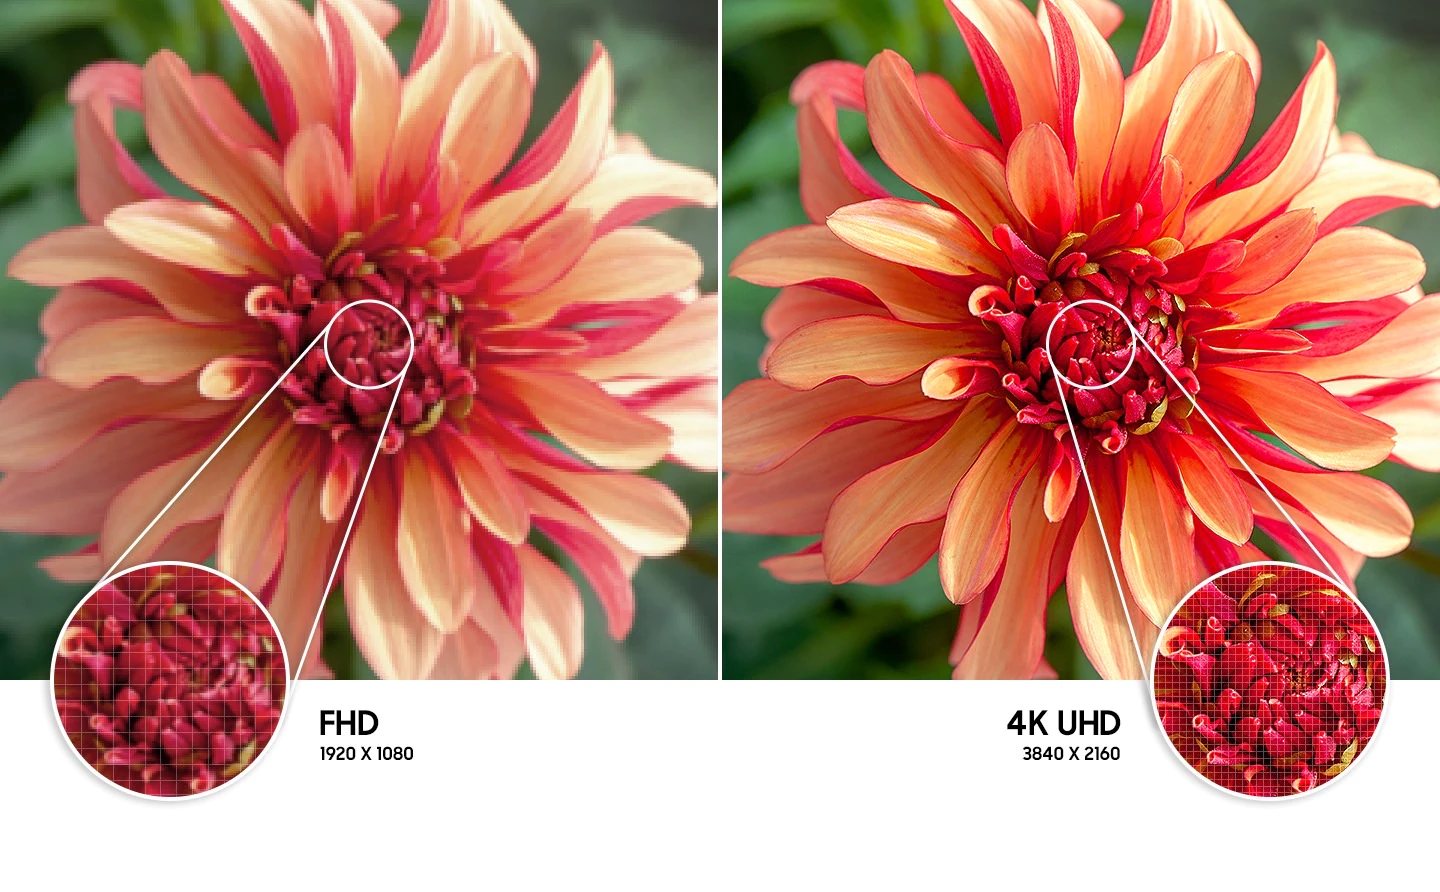  levant-feature-feel-the-reality-of-4k-uhd-resolution-393067048